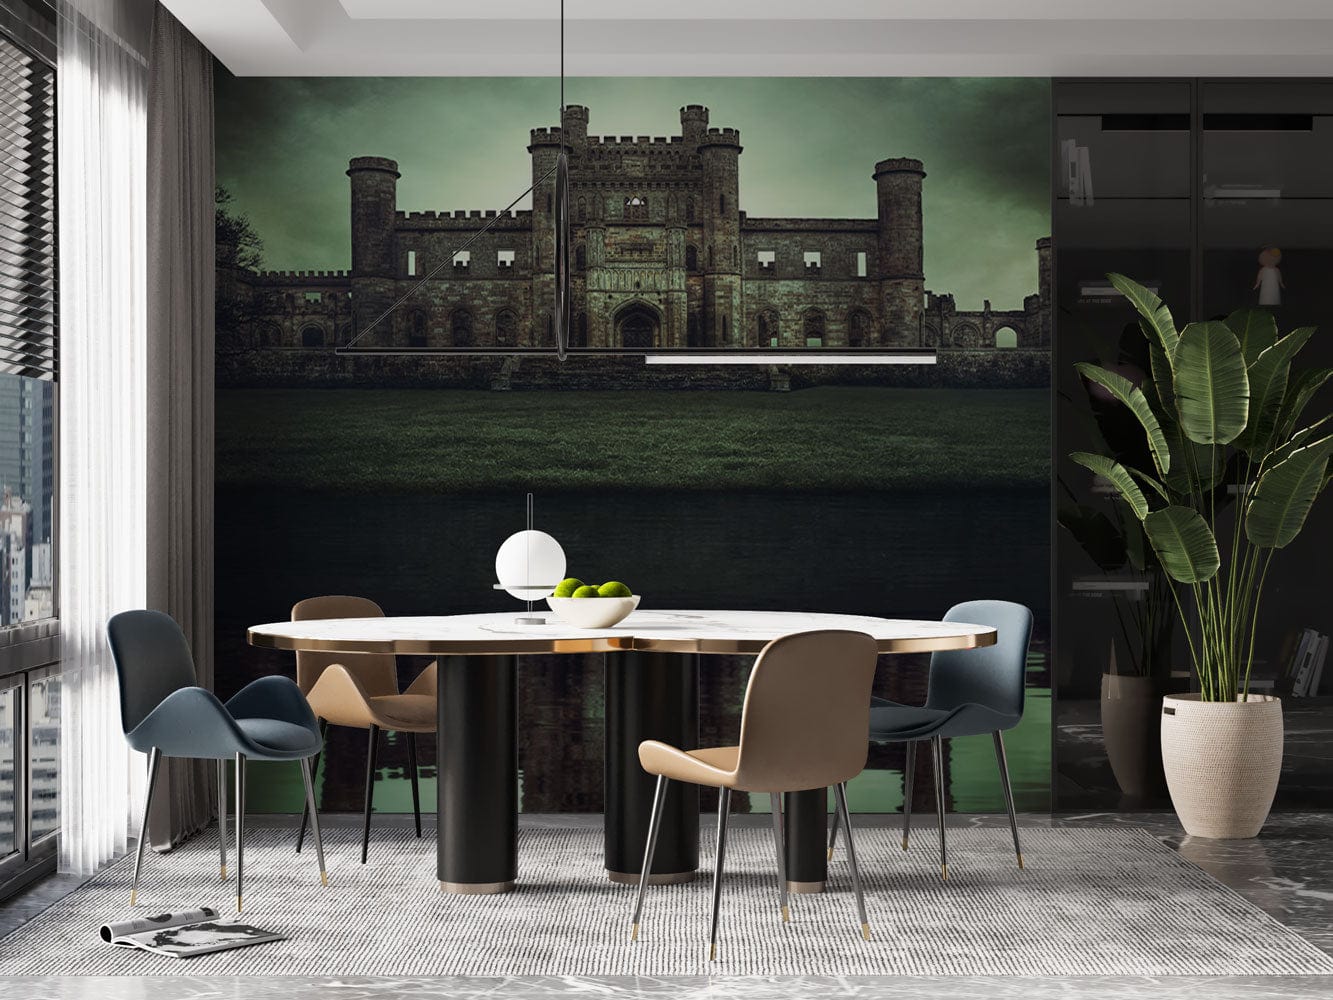 Wallpaper mural featuring the Lowther Castle and Gardens Scenery for use in decorating the dining room.